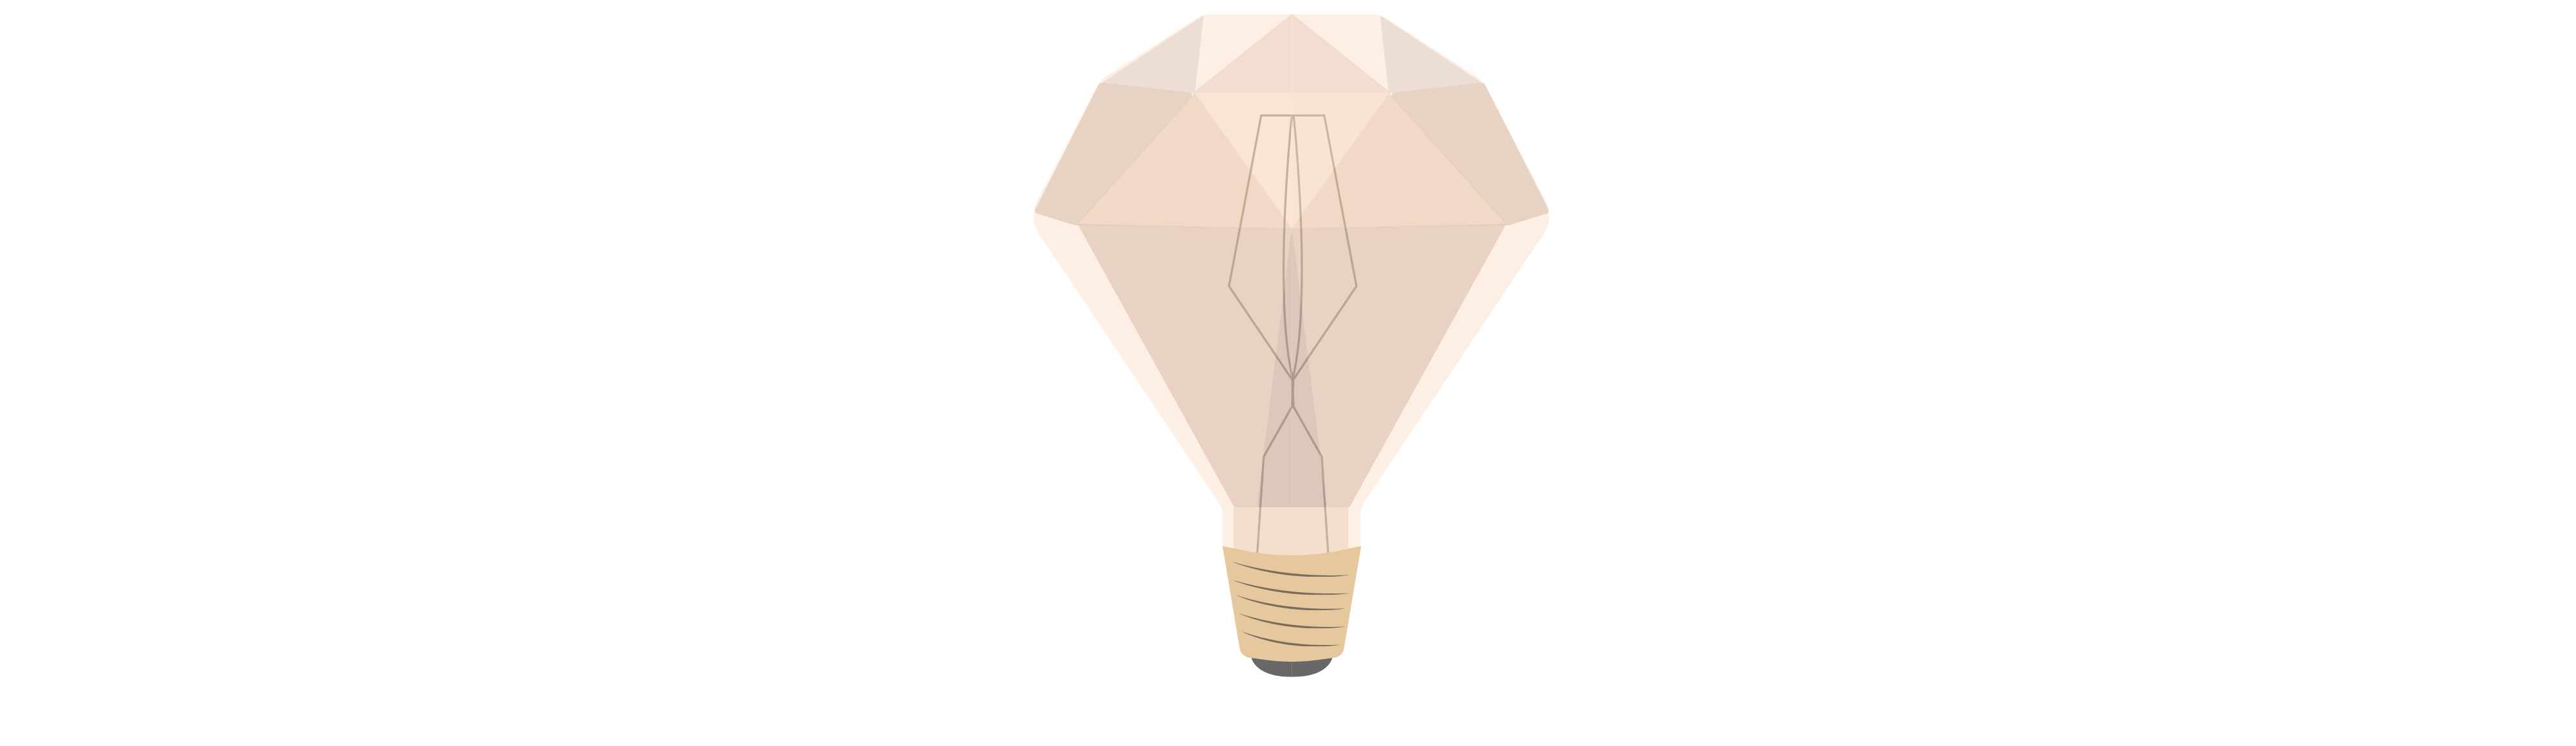 A lightbulb shows similar appearance to a diamond with multiple, angled faces.